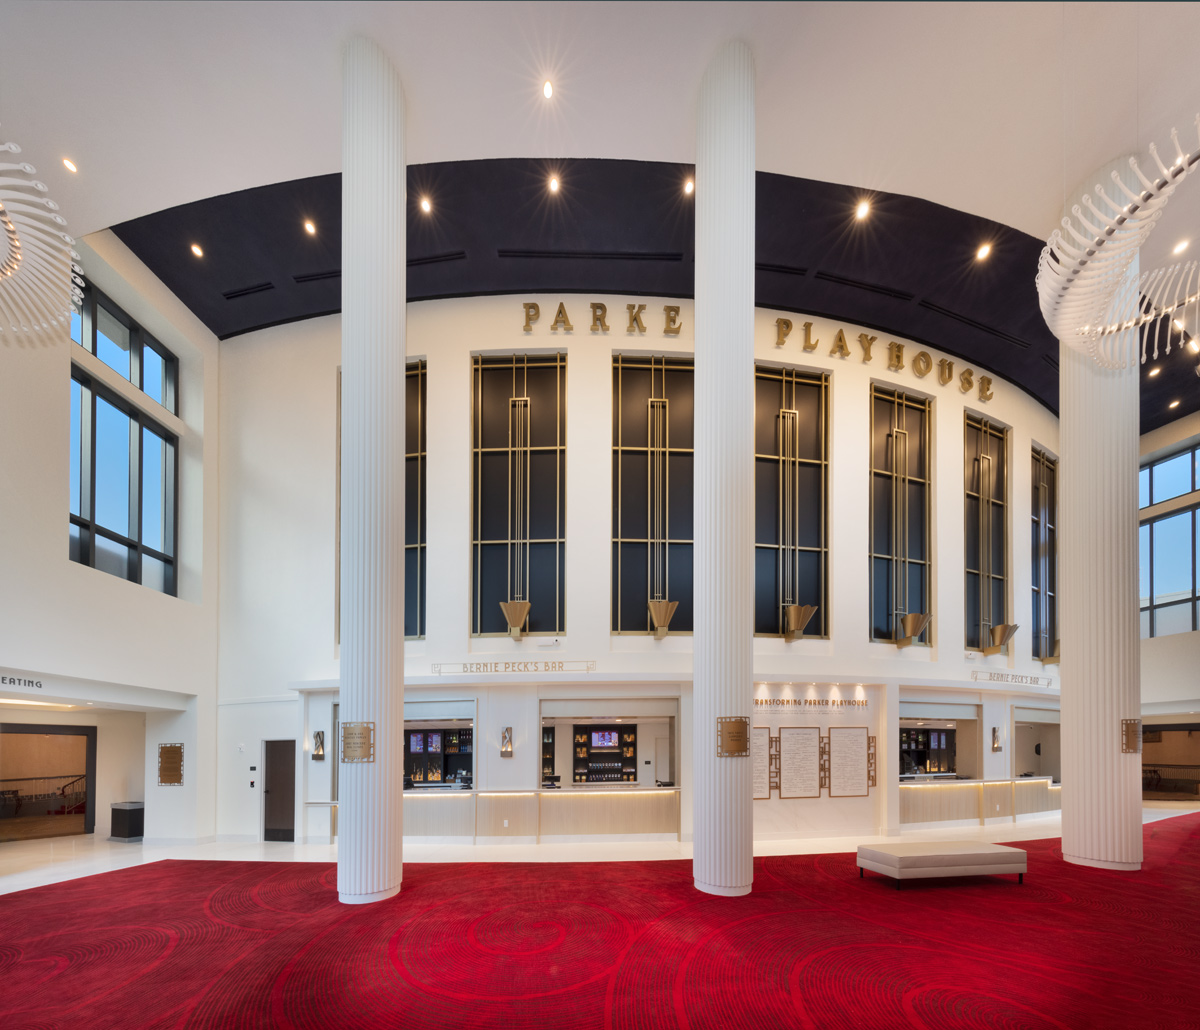 Interior design view of the Parker Playhouse theater lobby in Fort Lauderdale, FL. 